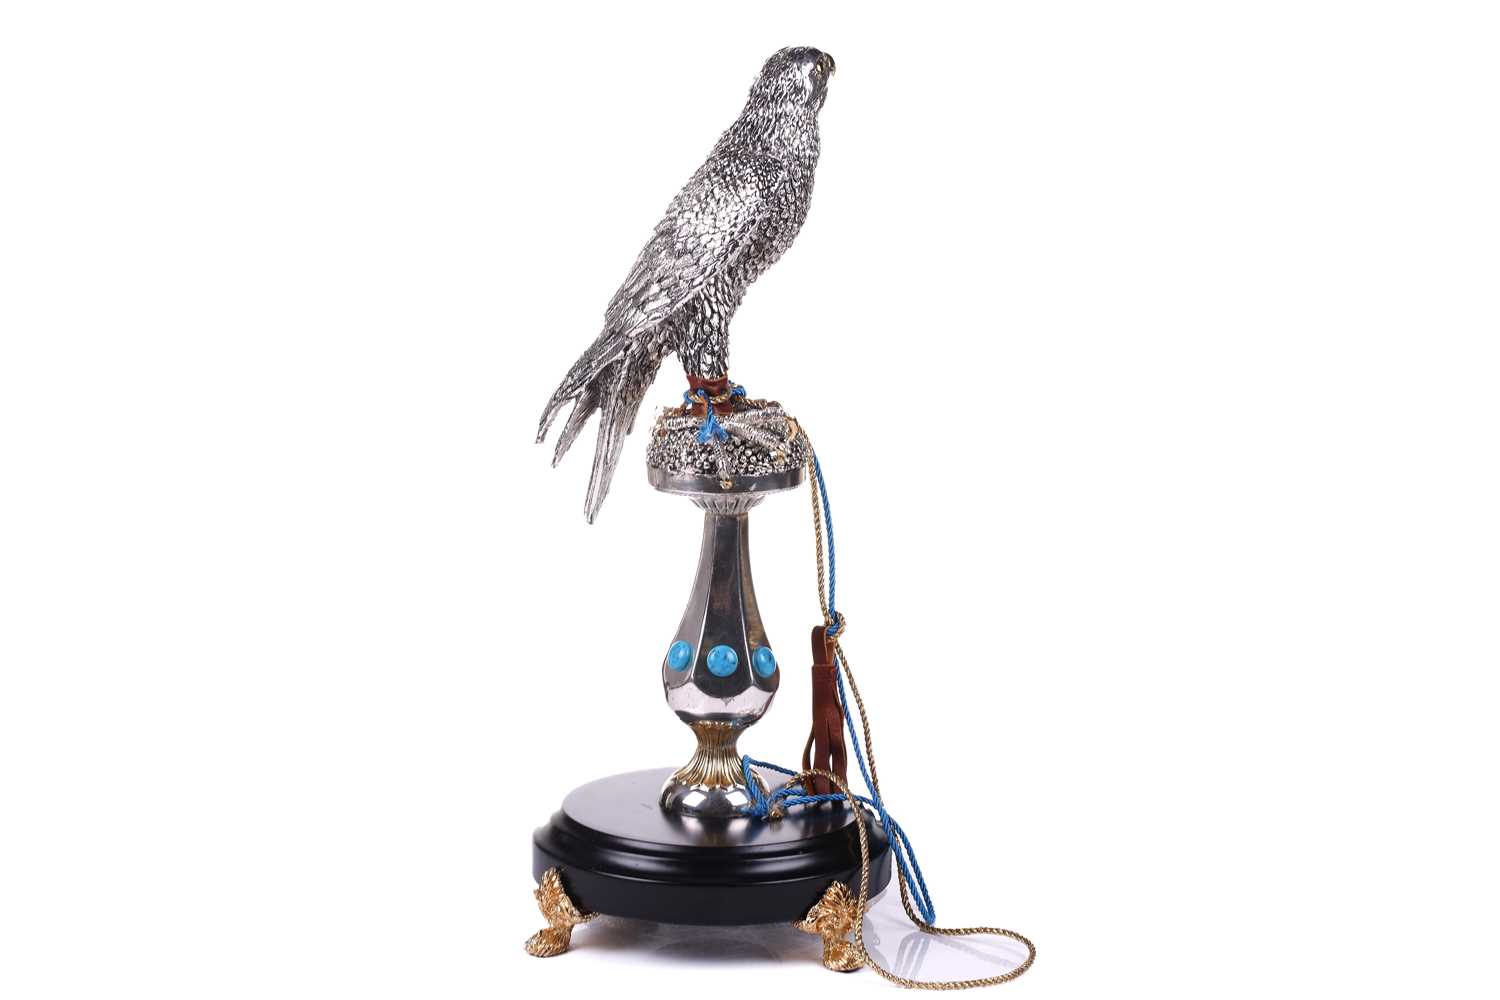 Lorenzo Sandomar, a large model of a silver and gold plated falcon, marked 925, standing on a - Image 3 of 10